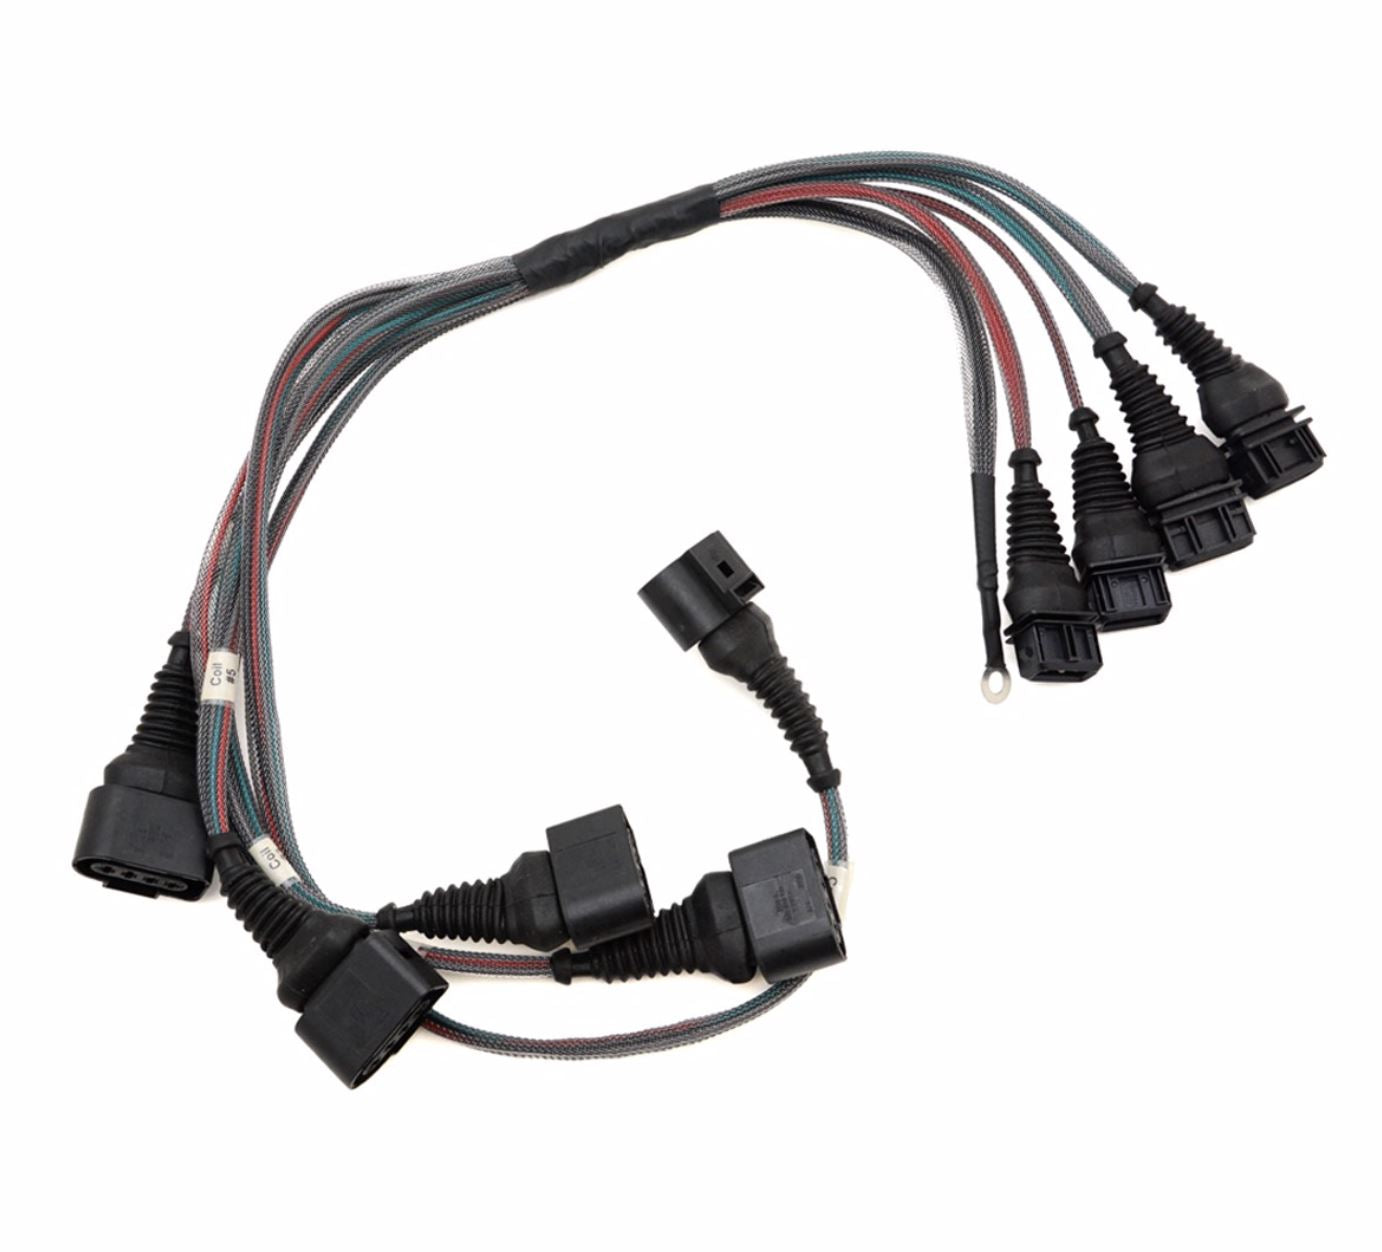 C4 Audi UrS4/UrS6 S2/RS2 I5 20V AAN/ABY/ADU Coil Pack Update Harness 2.0T Coils